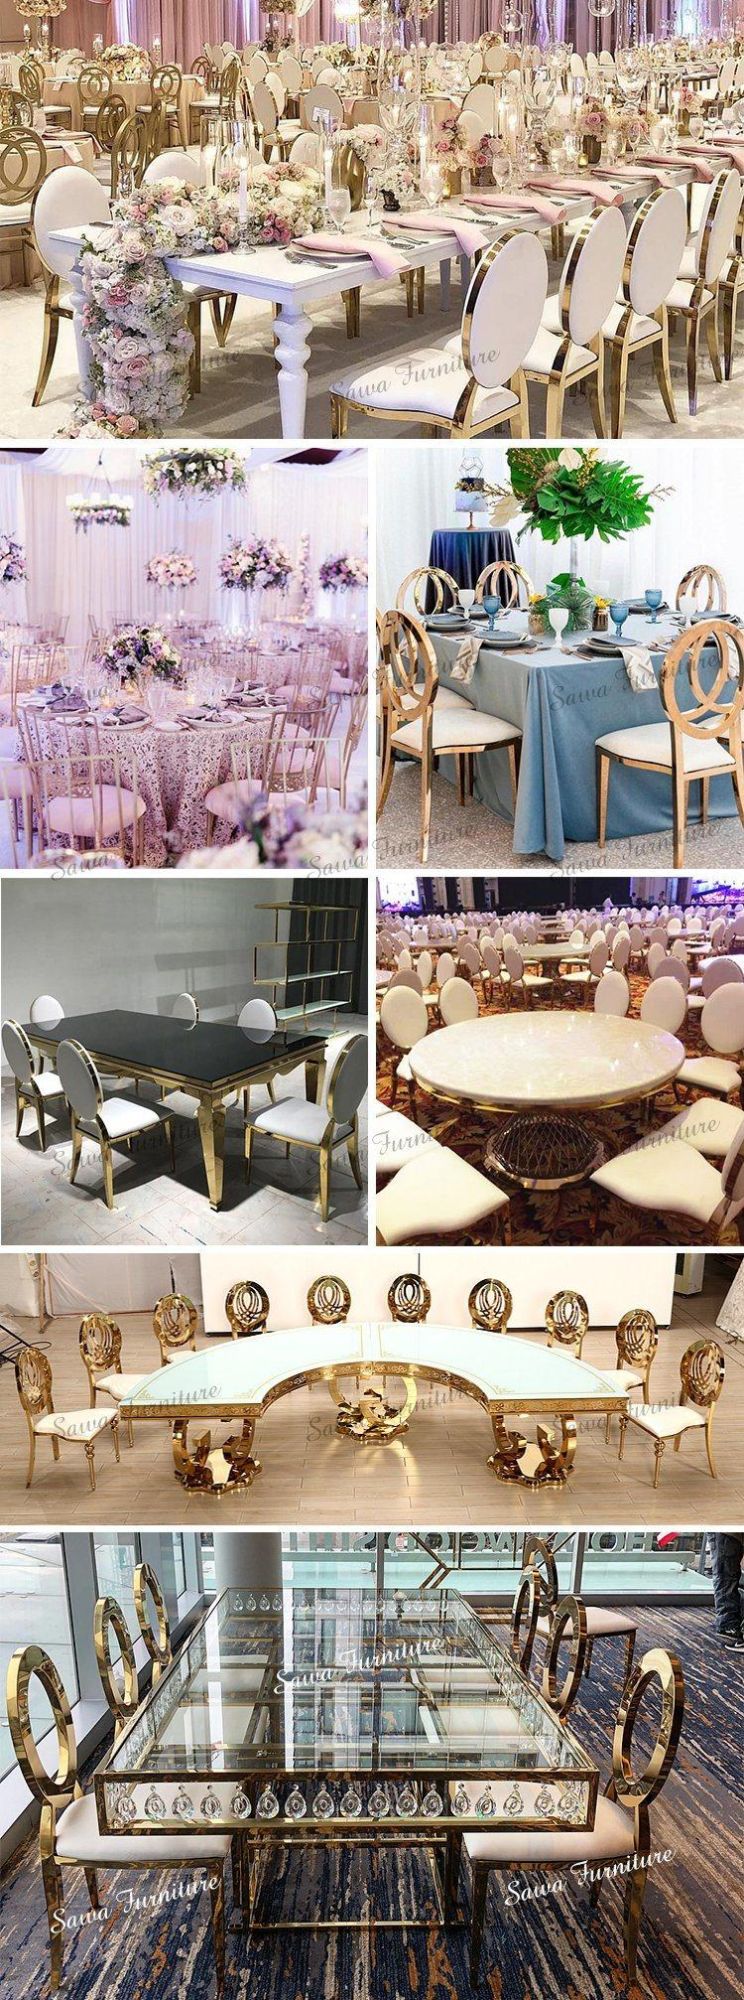 Transparent Resin Acrylic Stackable Wedding Tiffany Chiavari Chair for Wedding and Party